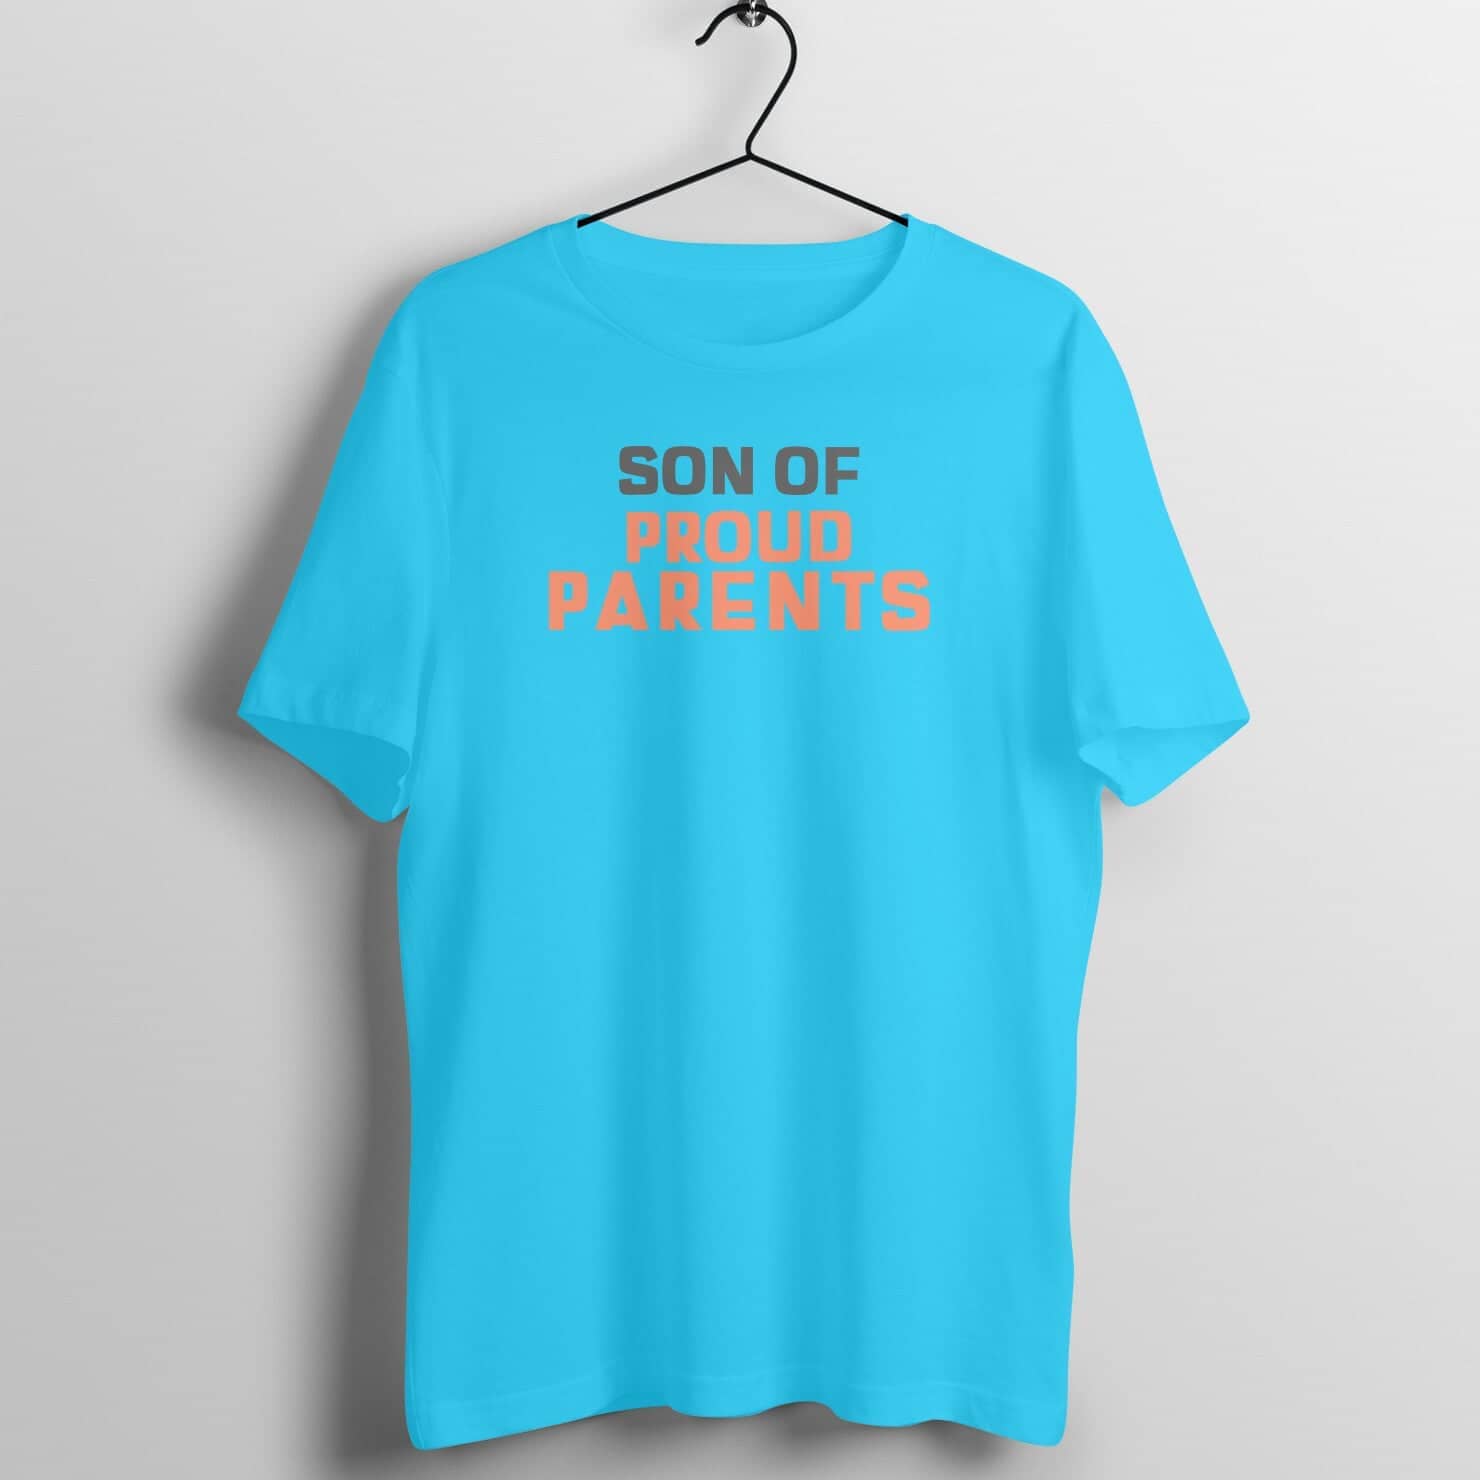 Son of Proud Parents Special T Shirt for Men freeshipping - Catch My Drift India